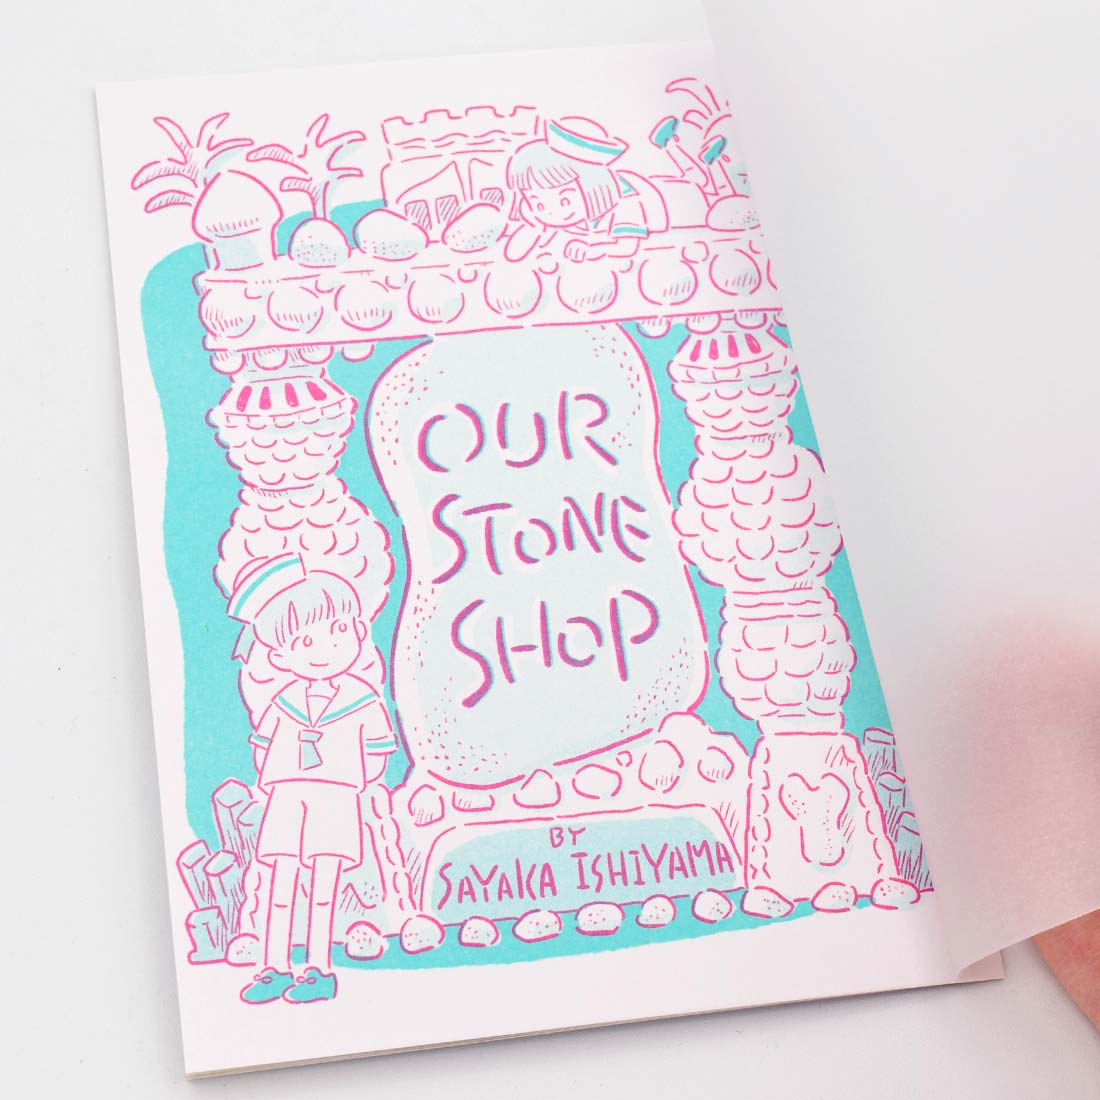 comixシリーズ「OUR STONE SHOP」 石山さやか